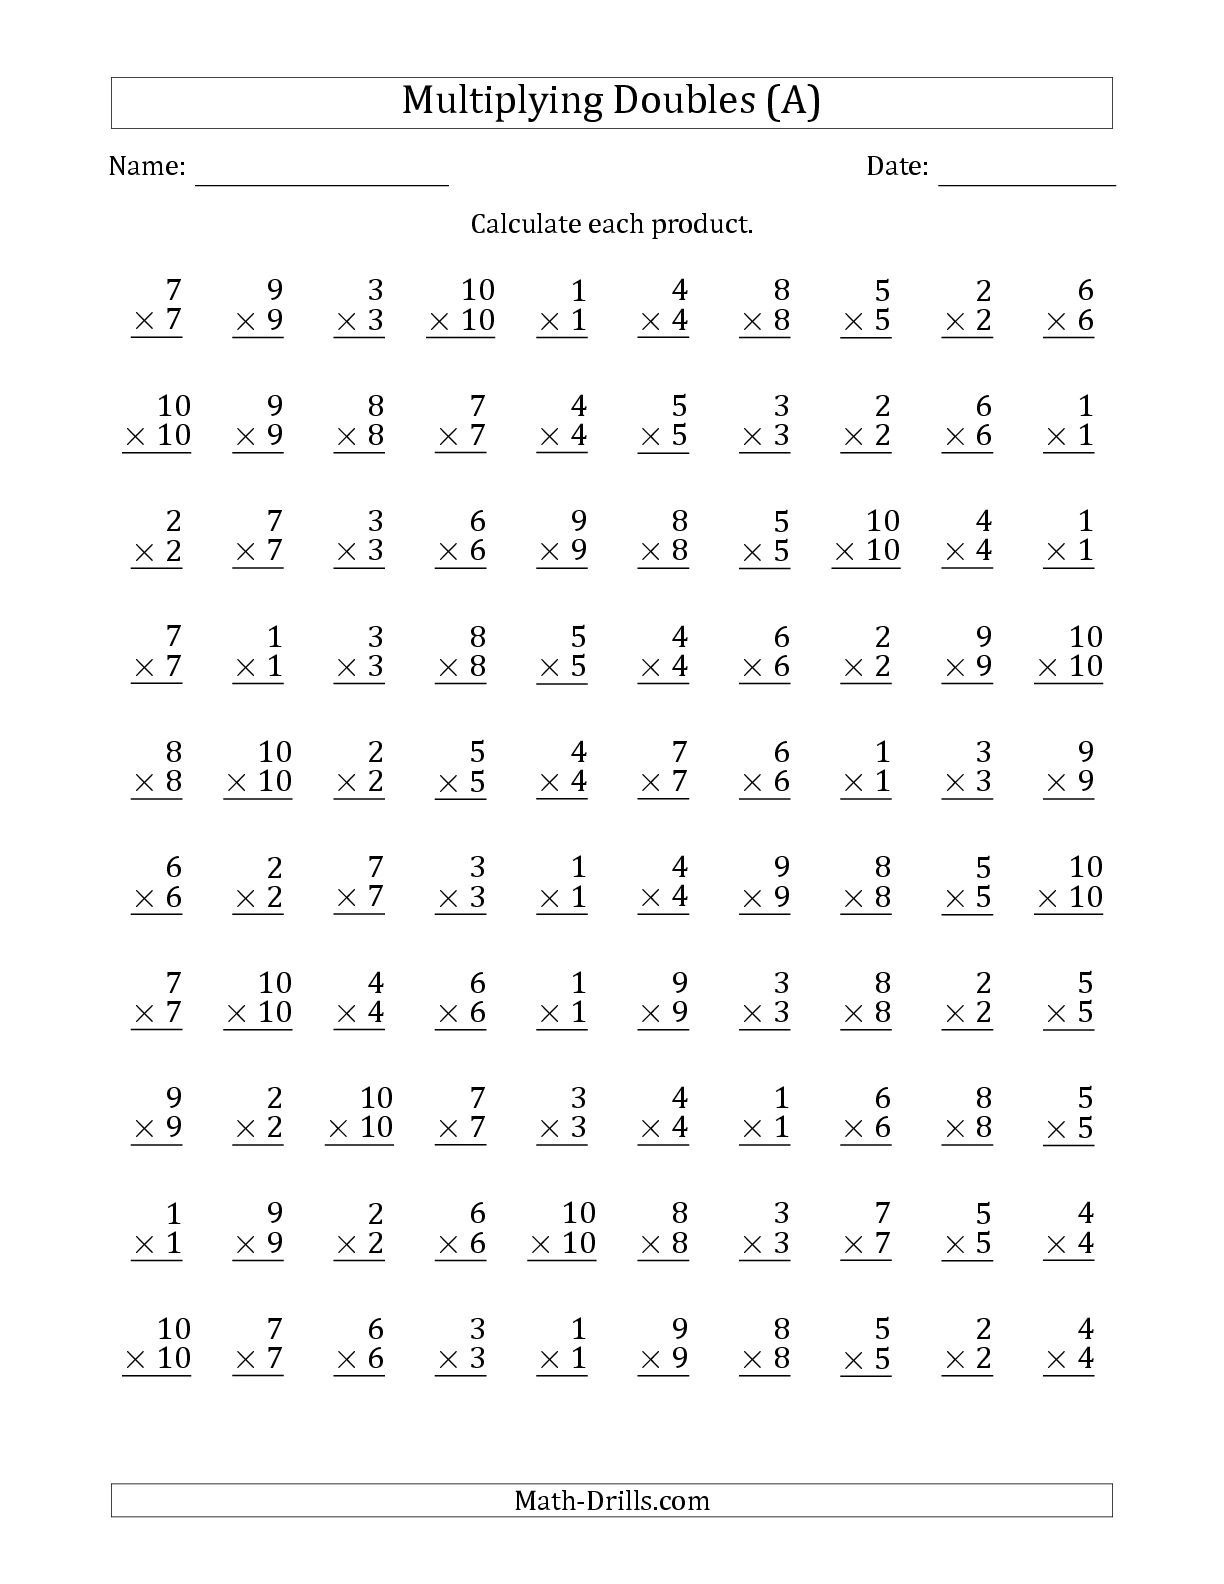 The Multiplying Doubles From 1 To 10 With 100 Questions Per Page (A - Free Printable Multiplication Fact Sheets